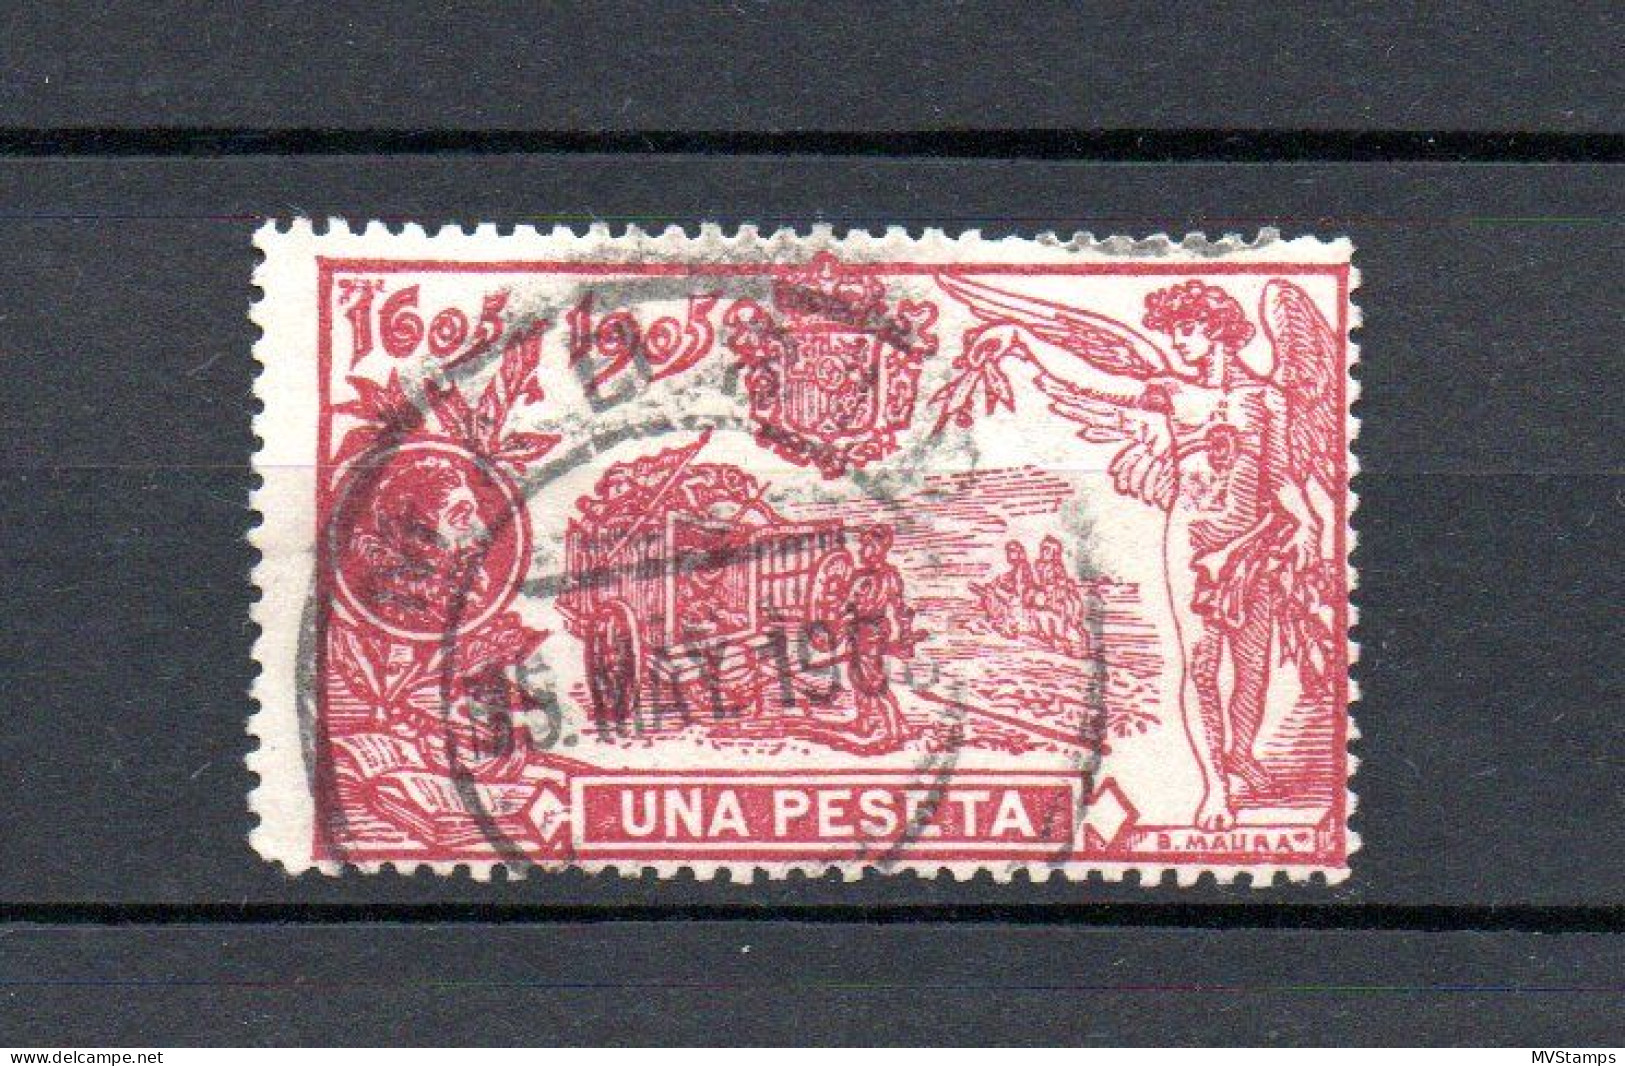 Spain 1905 Old 1 Peseta Don Quijote Stamps (Michel 227) Nice Used - Oblitérés